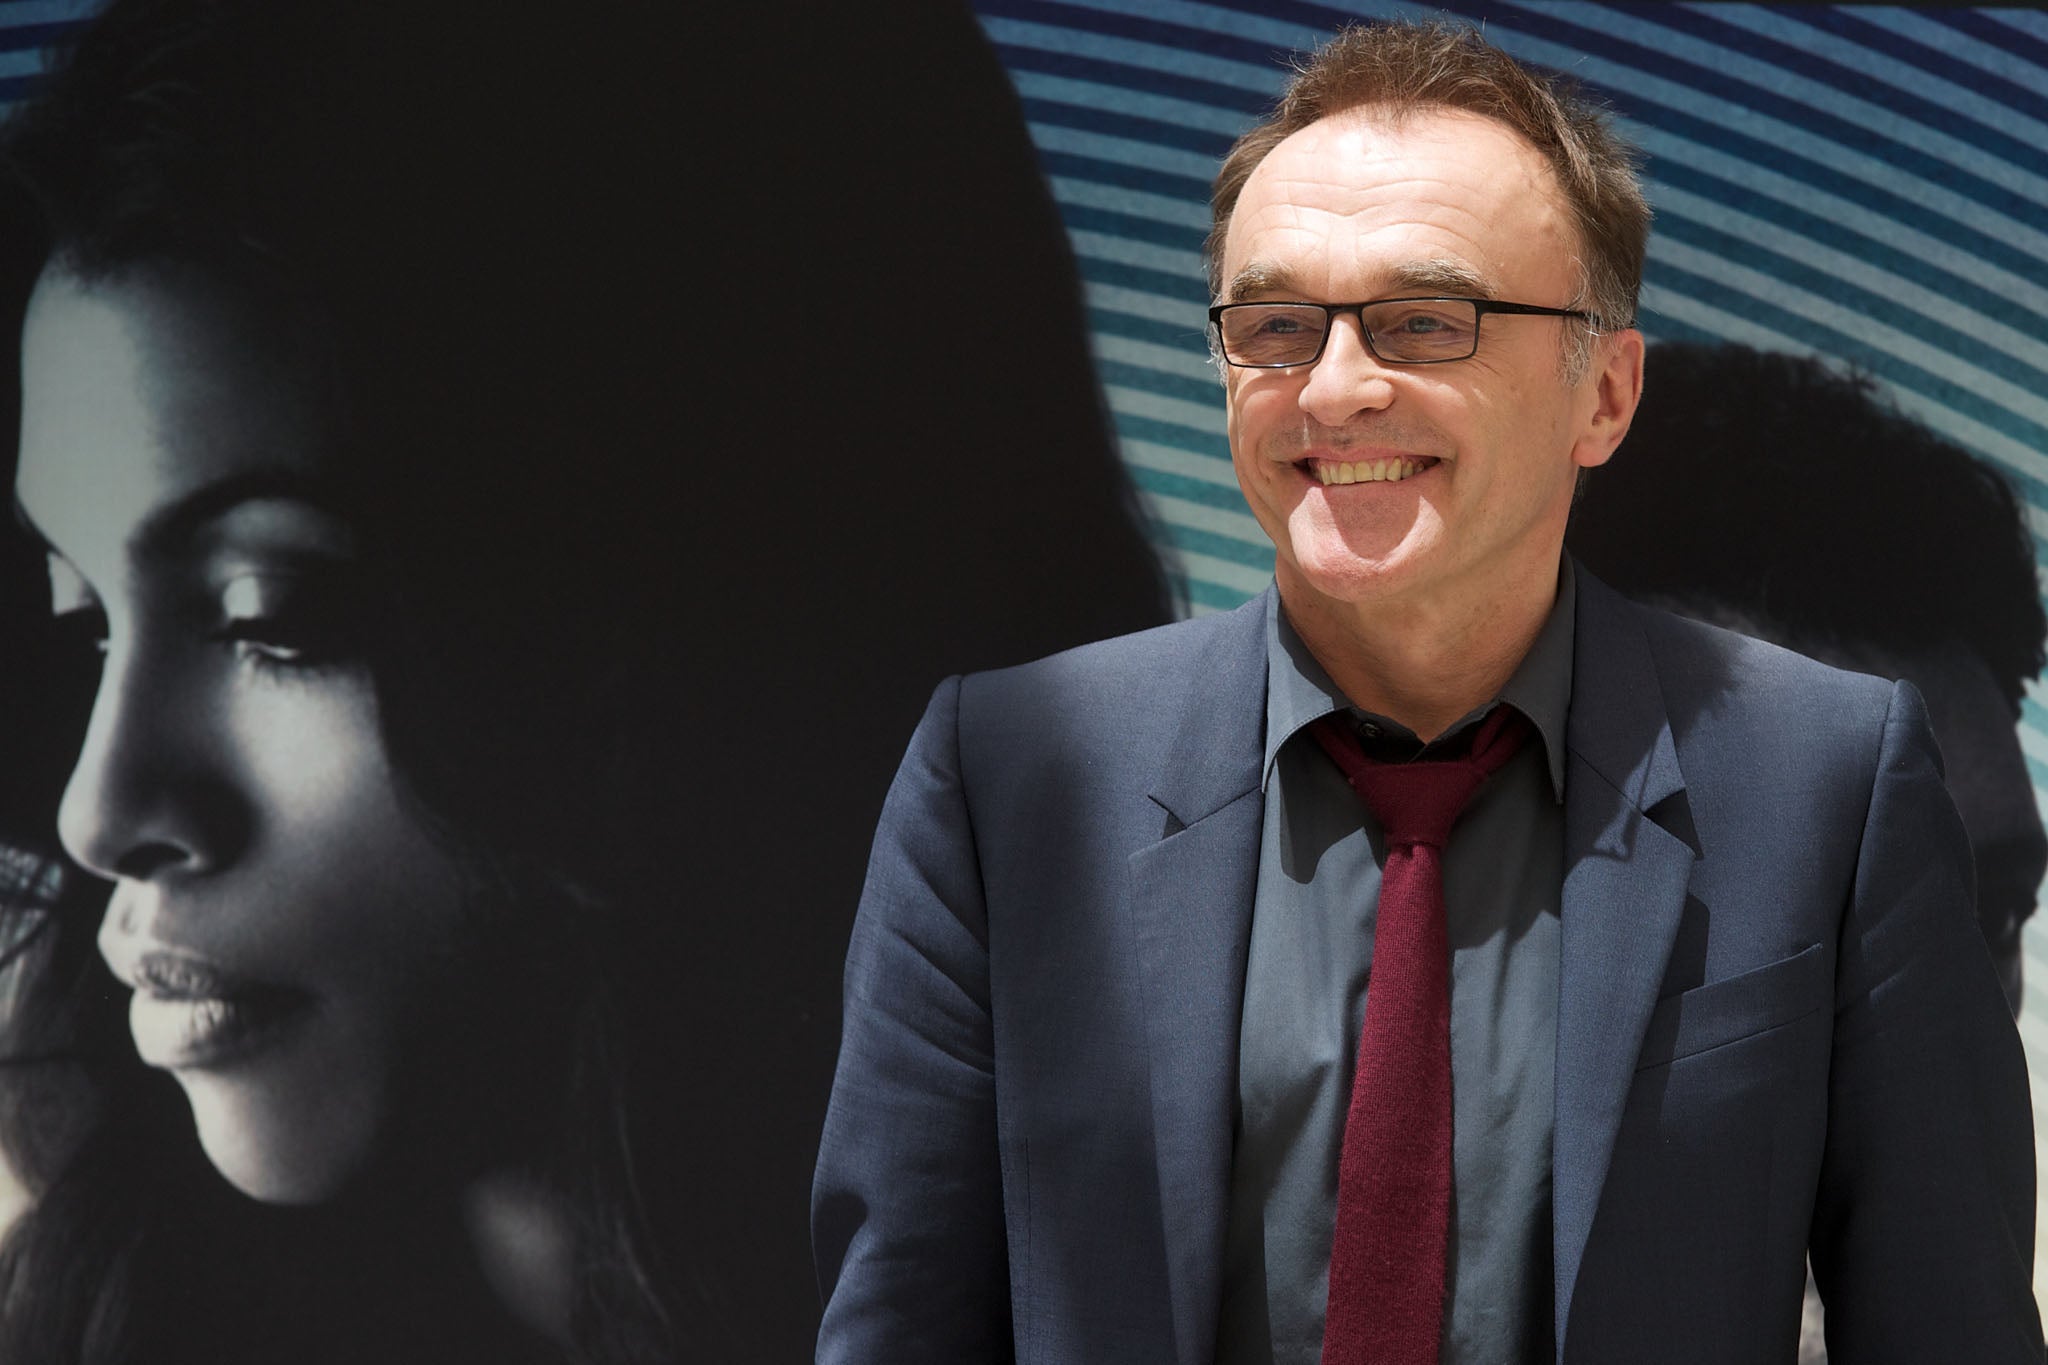 Oscar-winning director Danny Boyle is to team up with Peep Show writers for a new Channel 4 drama